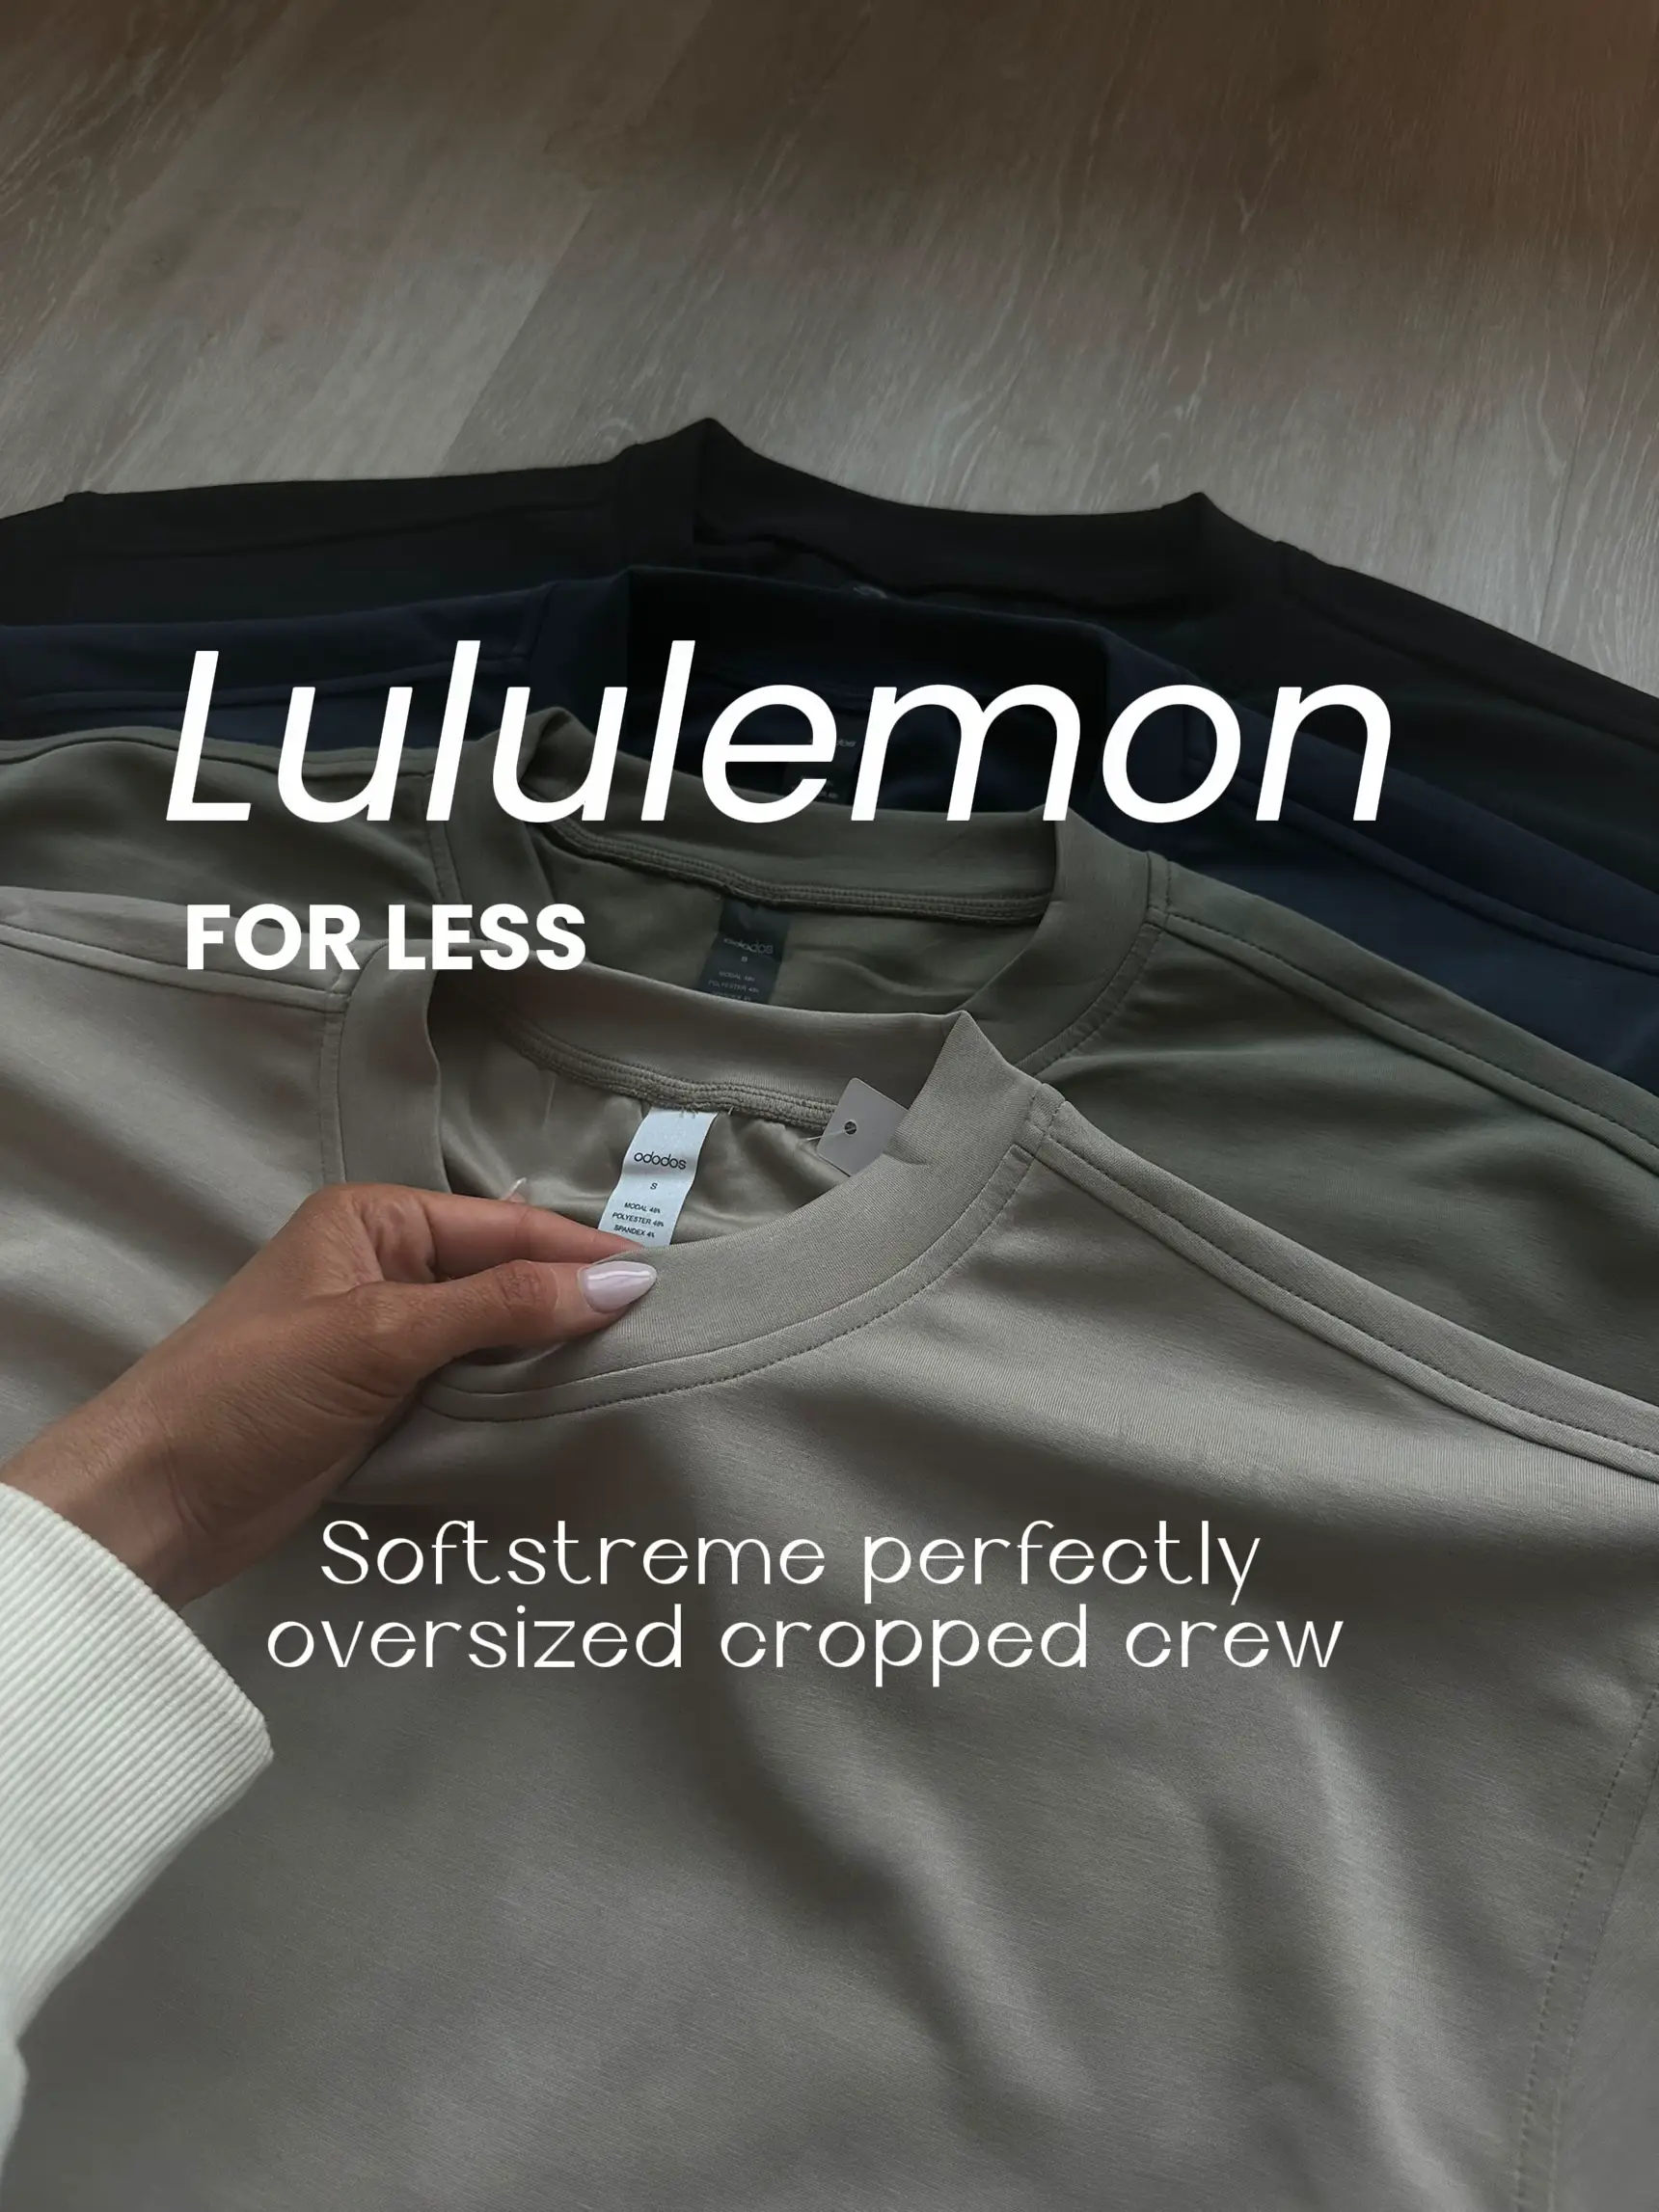 Help me pick out a @lululemon outfit to wear! 🍋, ribbed softstreme s